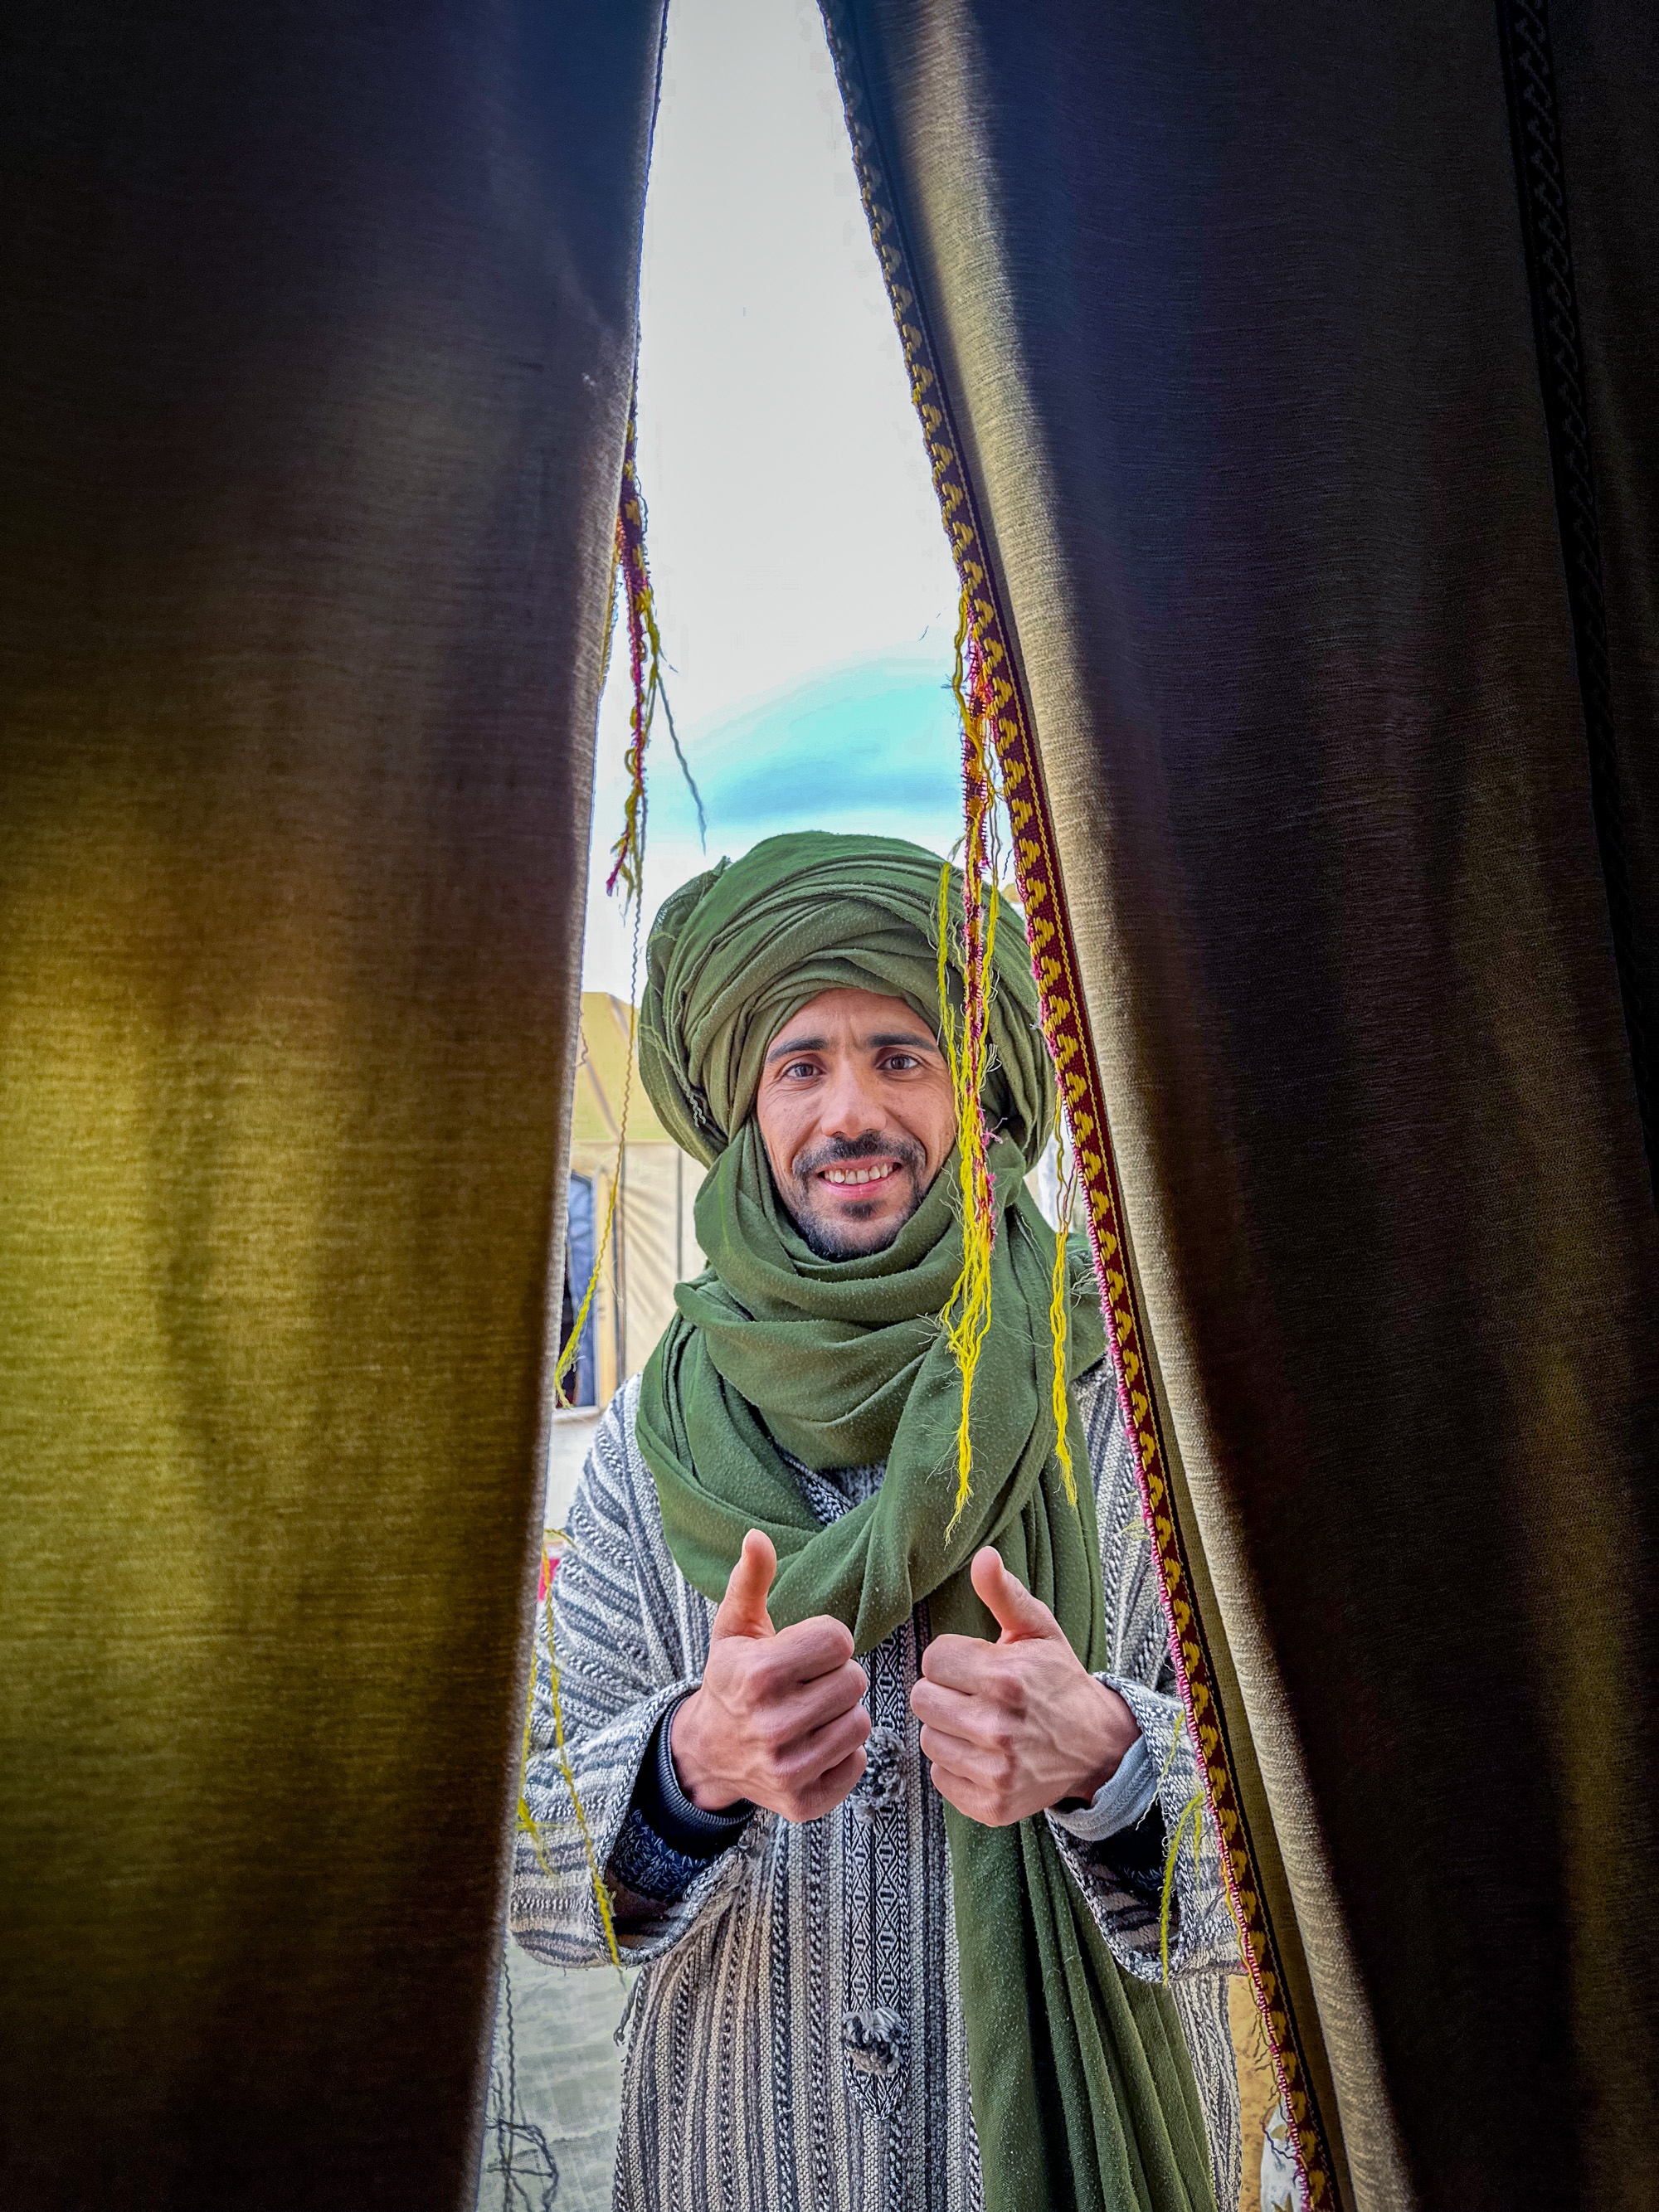 Berber man thumbs up in Morocco